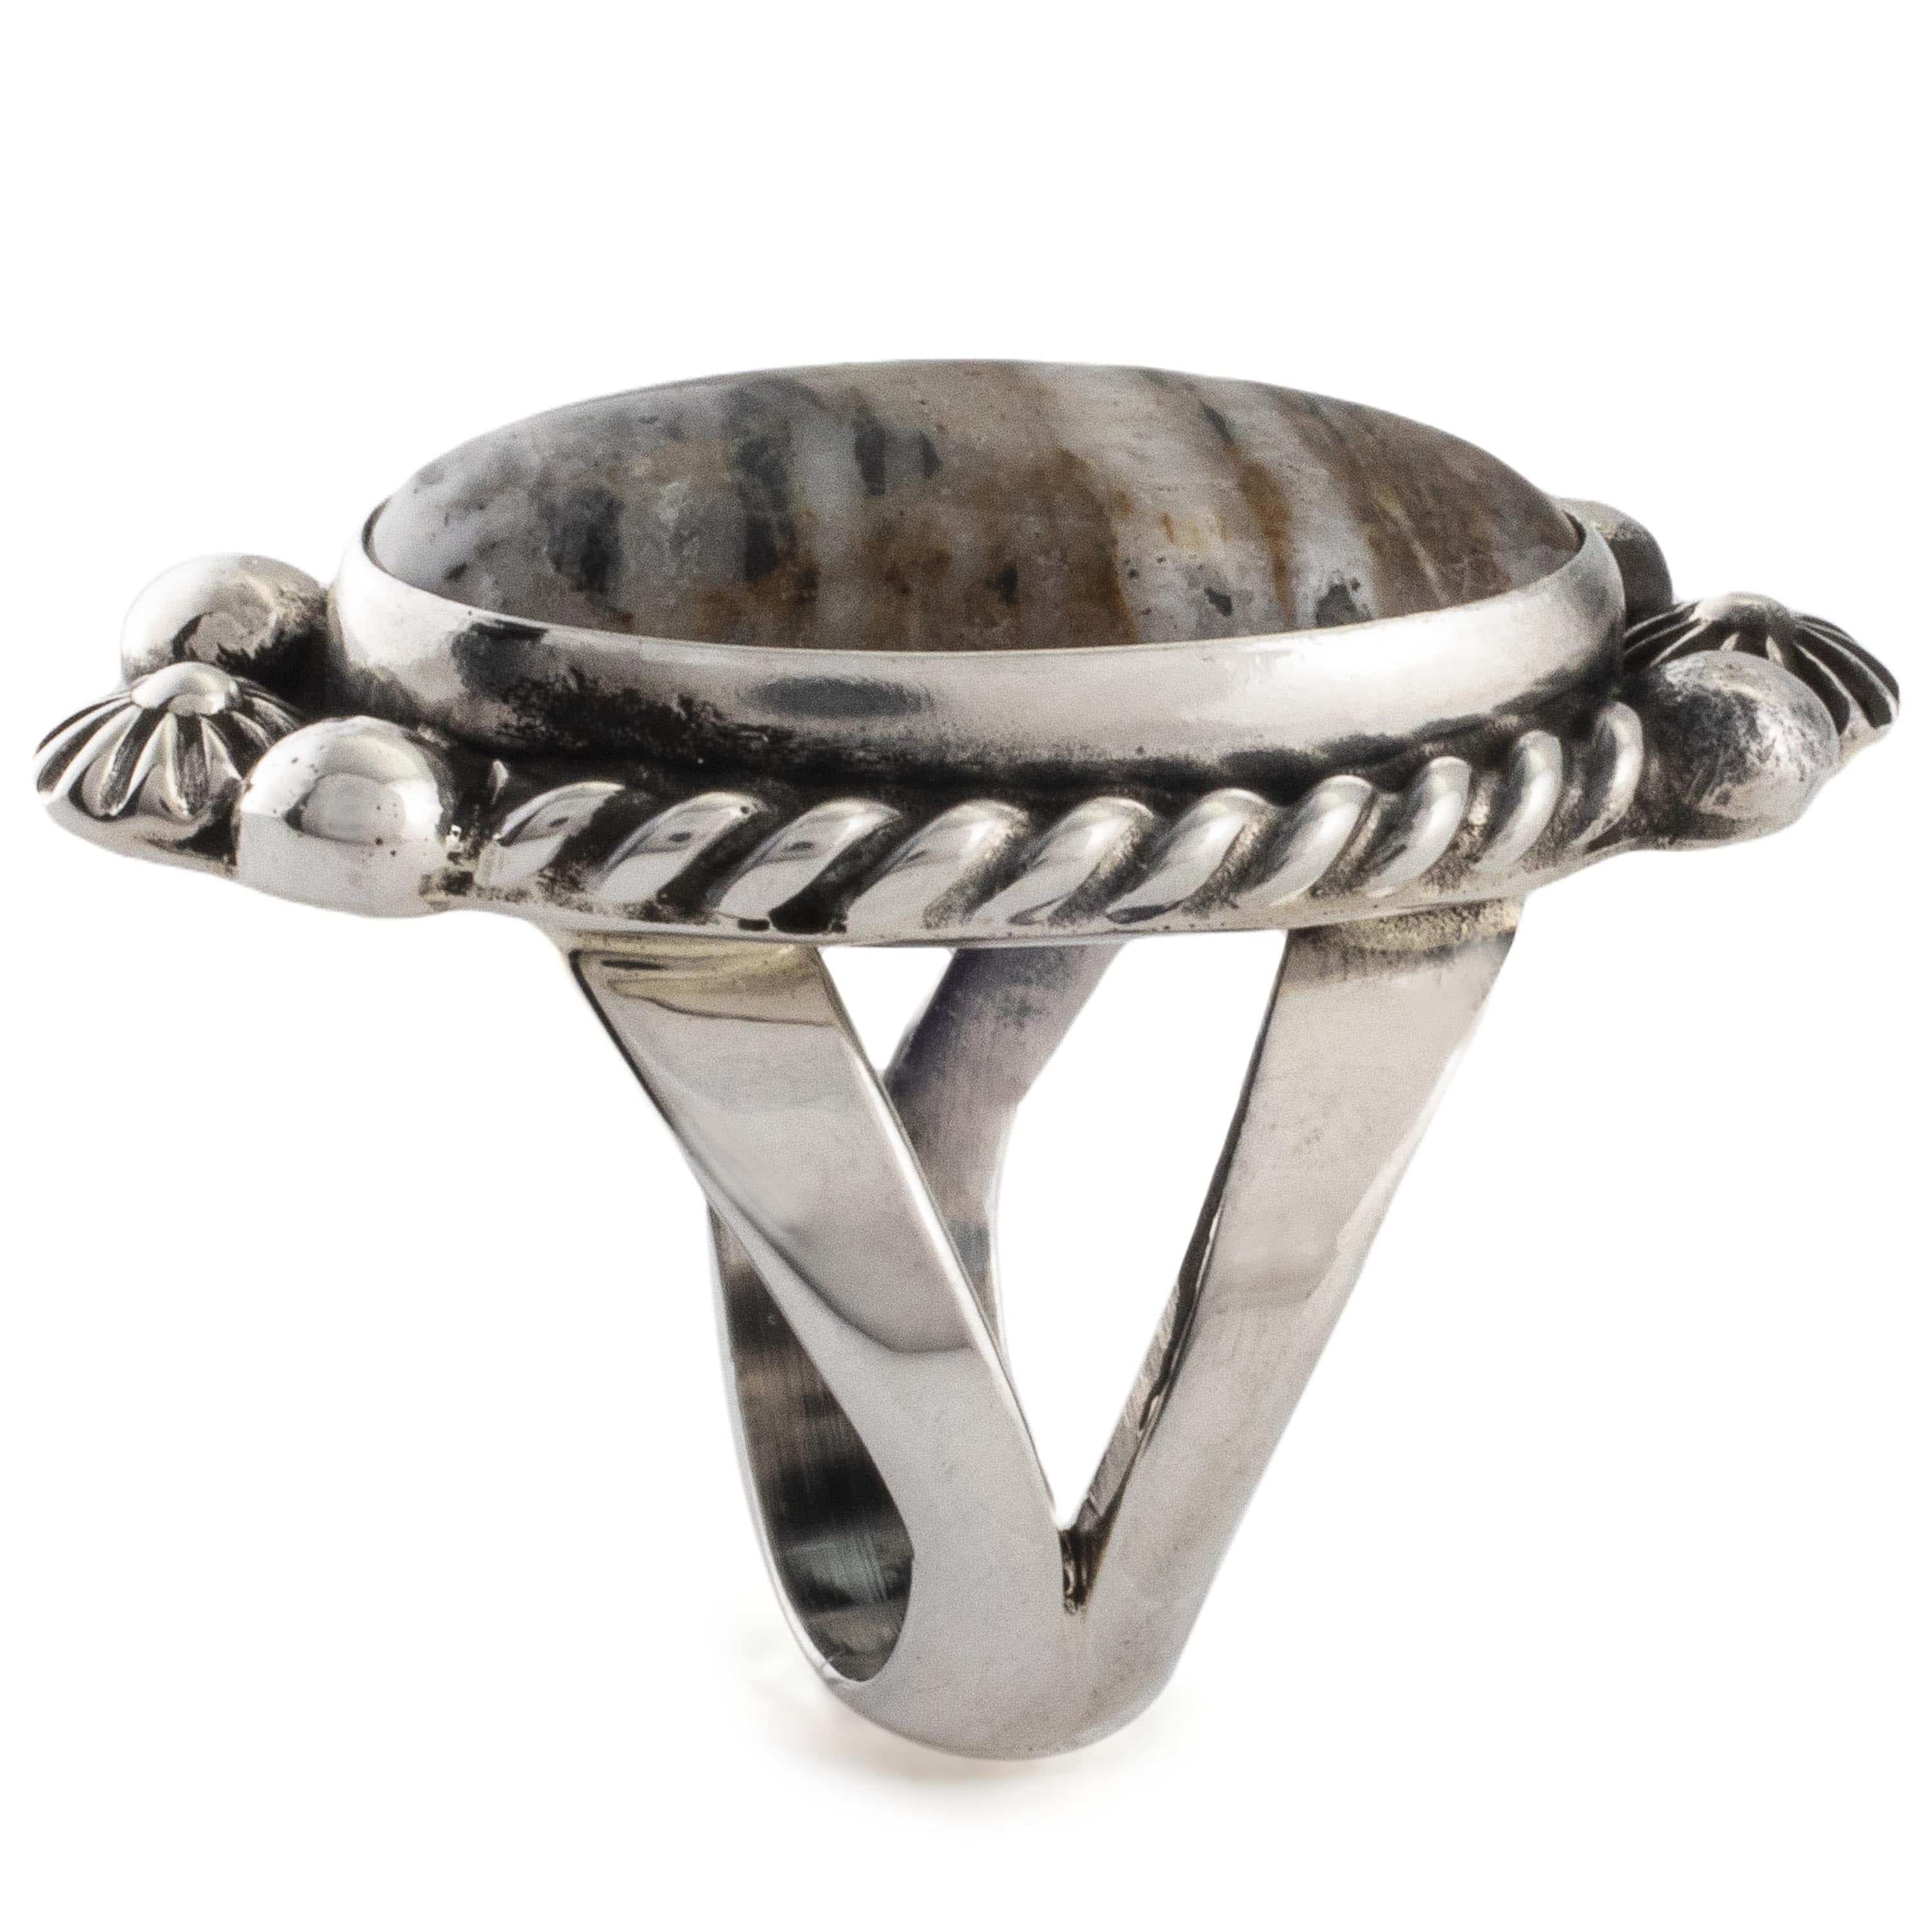 Kalifano Native American Jewelry 8 Eddie Secatero Navajo White Buffalo Turquoise USA Native American Made 925 Sterling Silver Ring NAR800.028.8